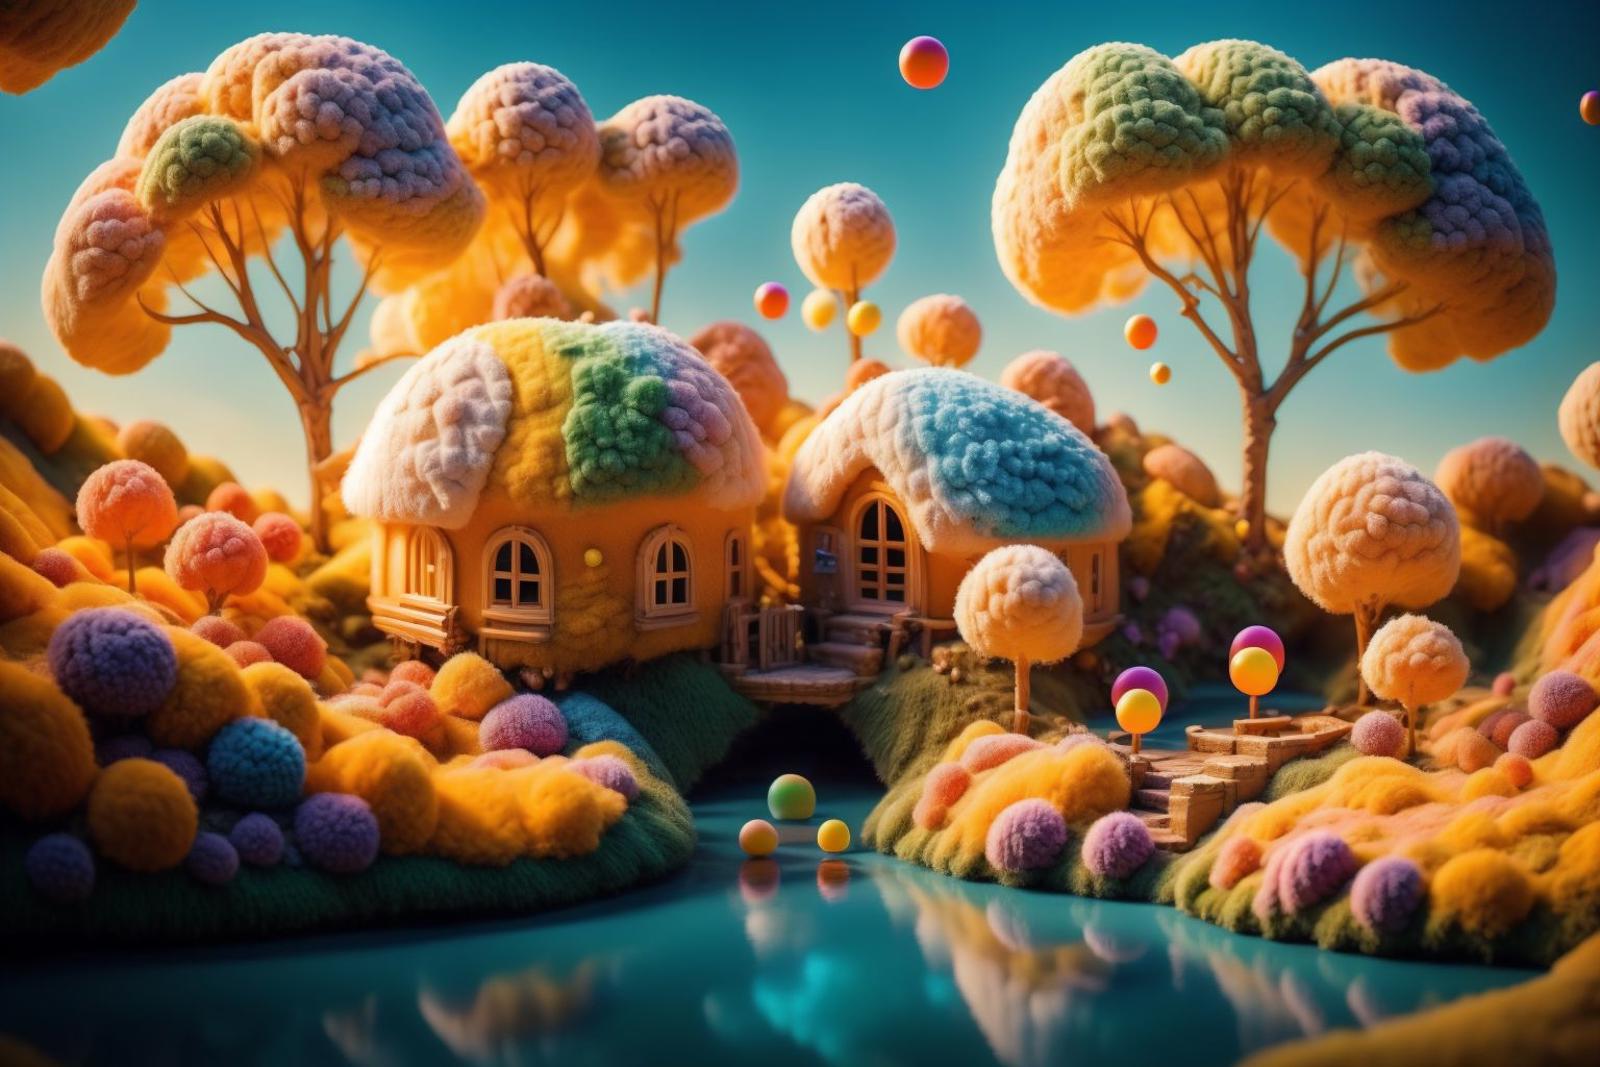 CANDYLAND image by Mord